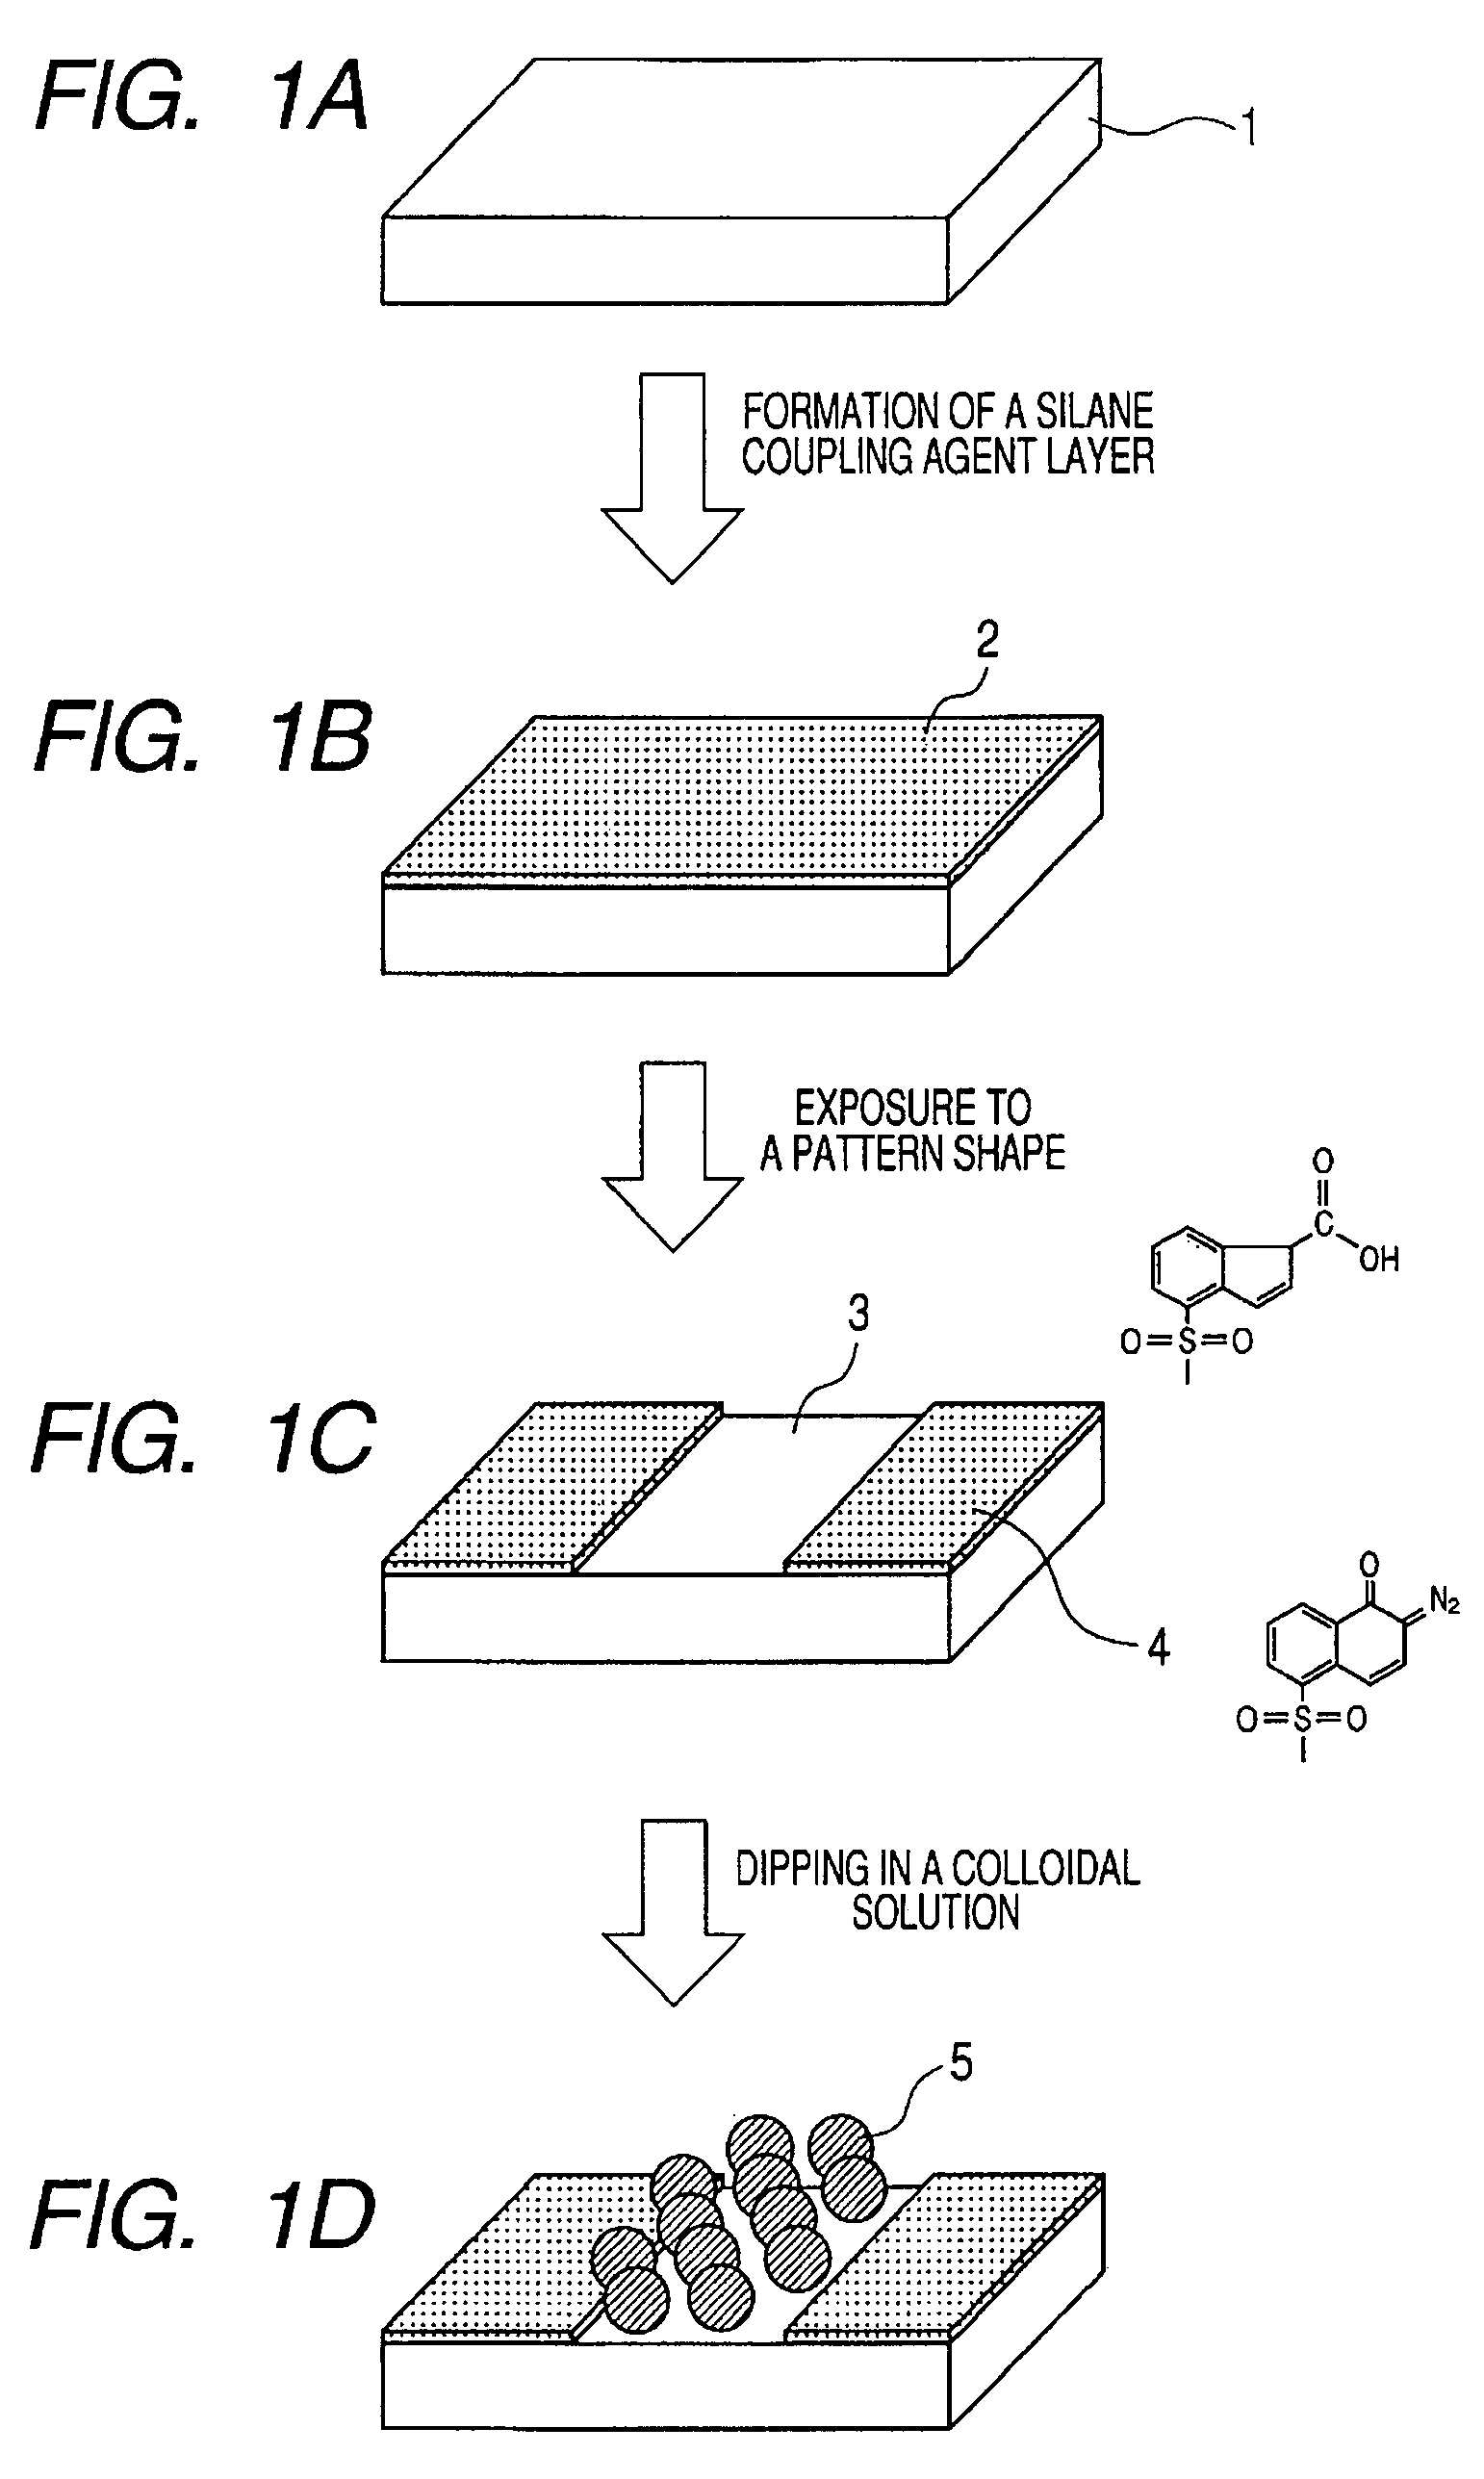 Photosensitive silane coupling agent, method of modifying surface, method of forming pattern, and method of fabricating device